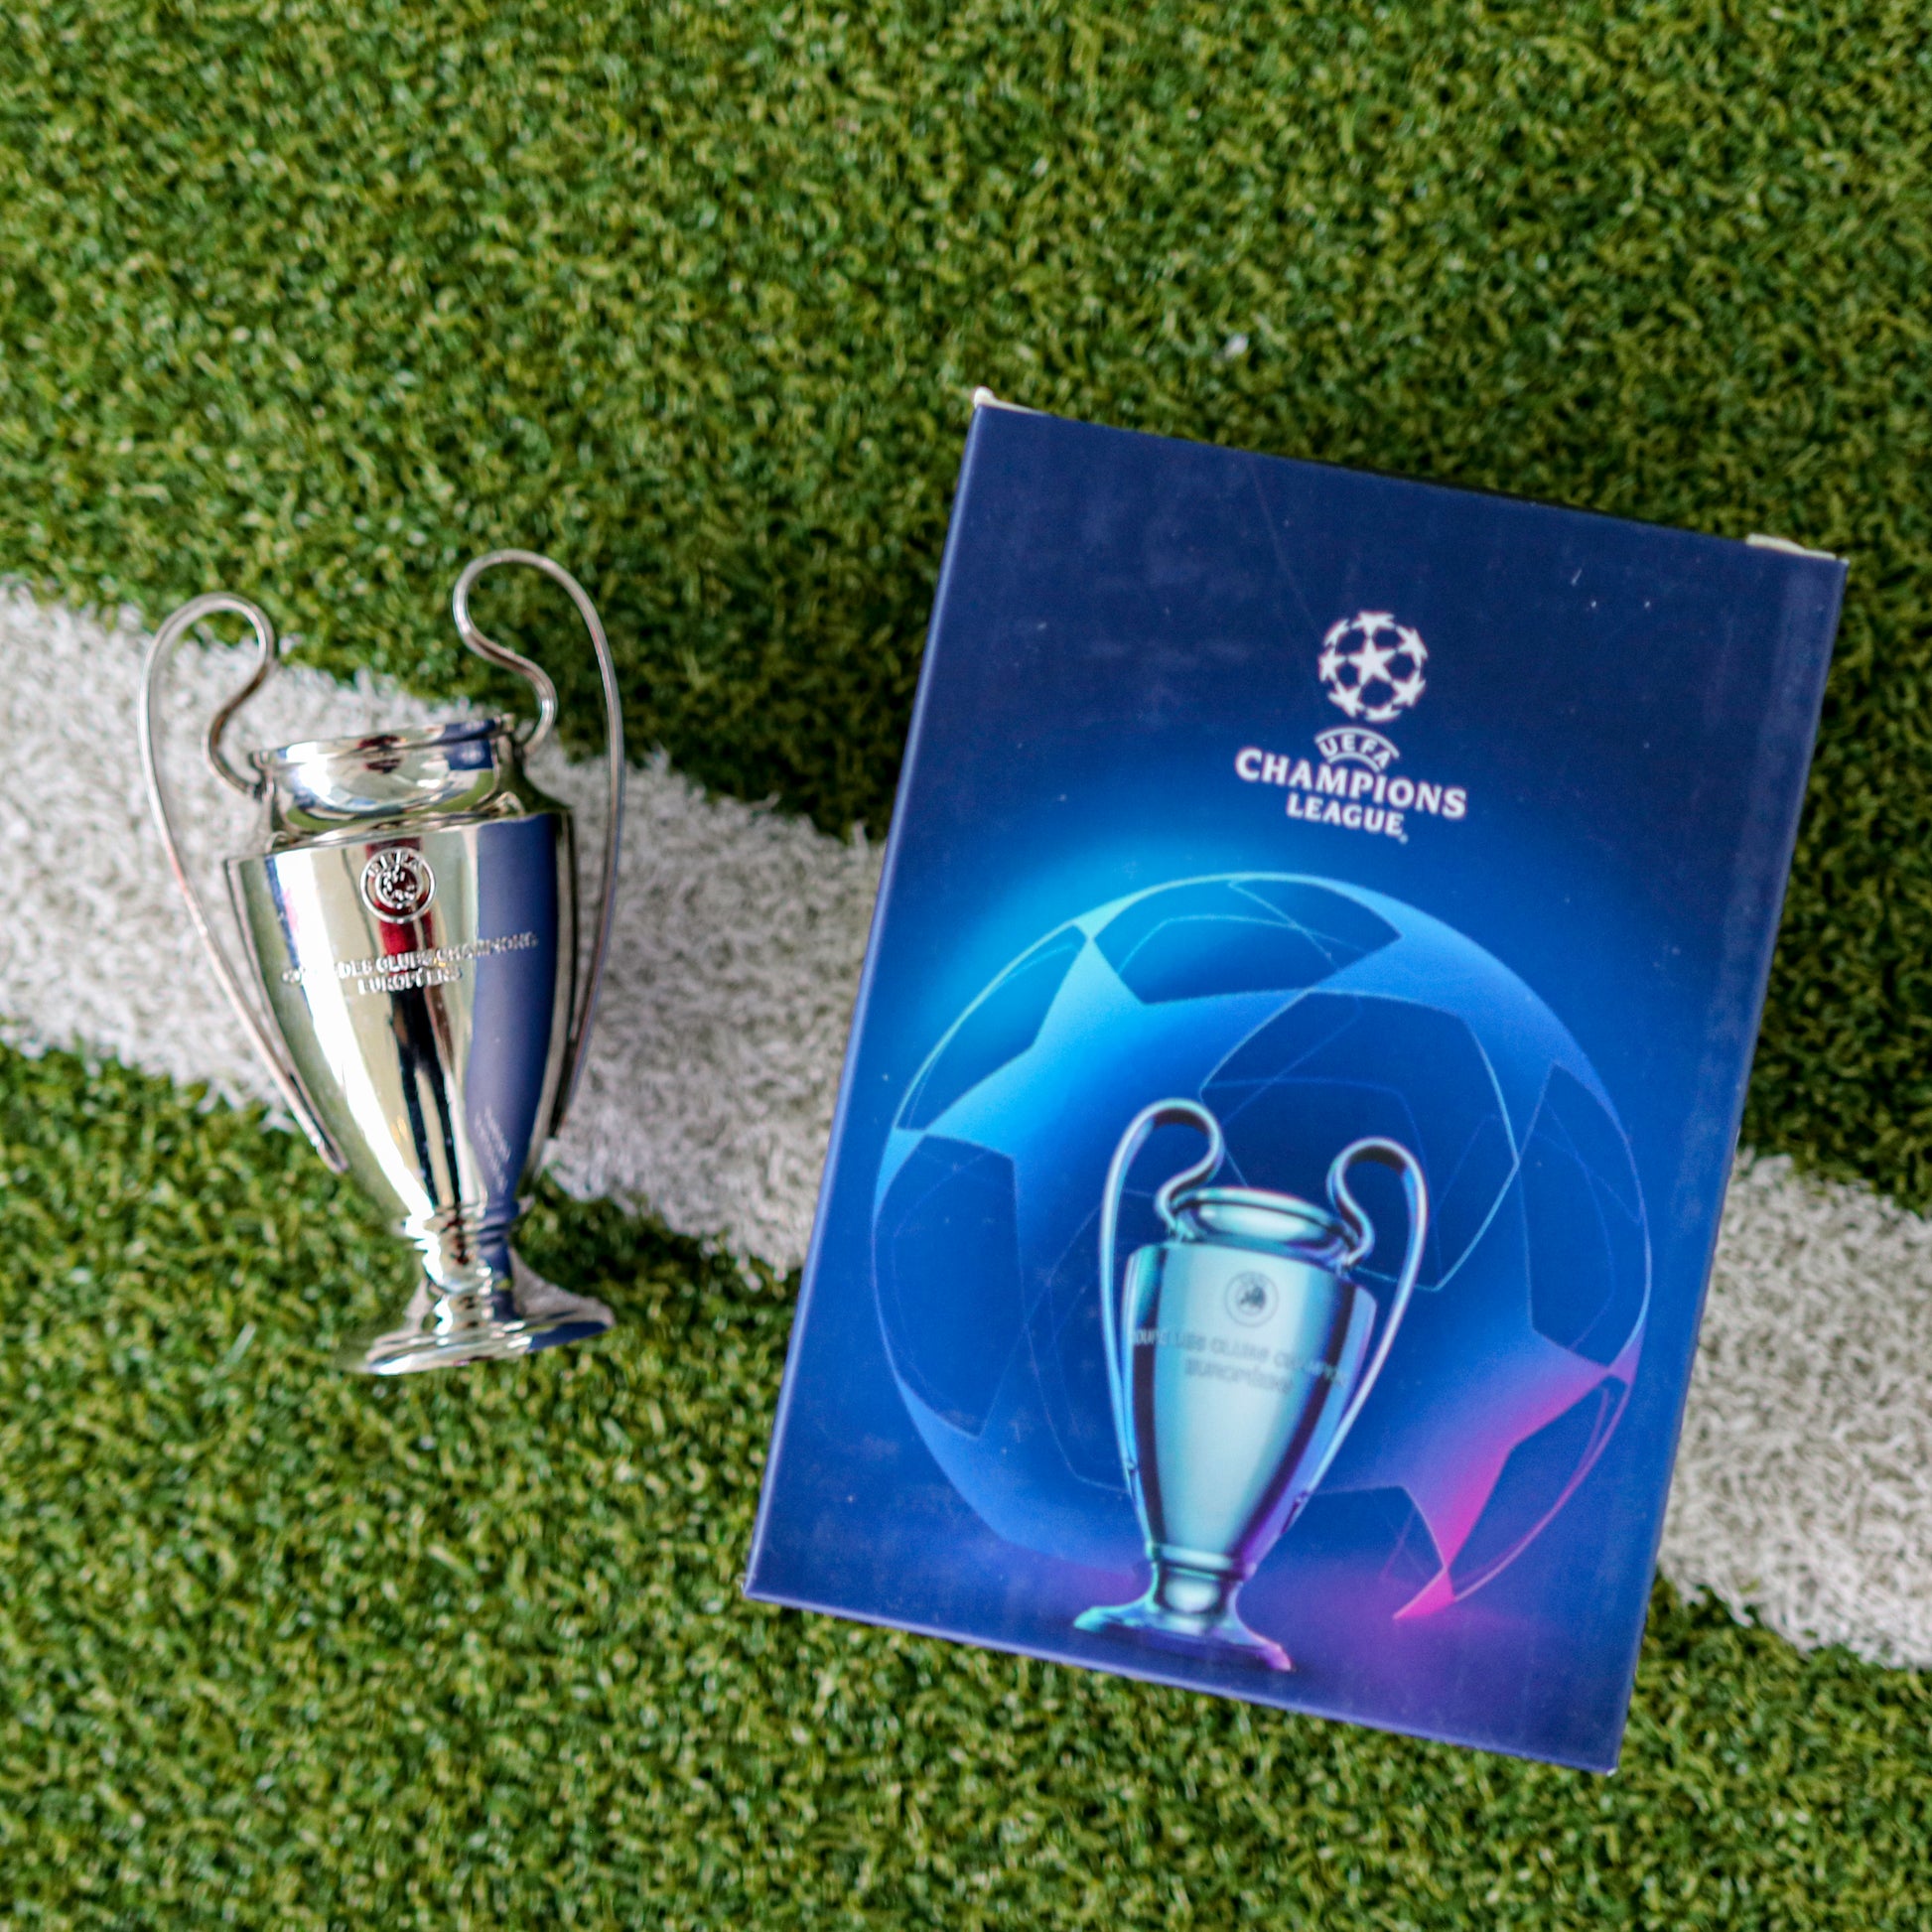 Champions League 150mm Trophy with Plinth – National Football Museum Shop